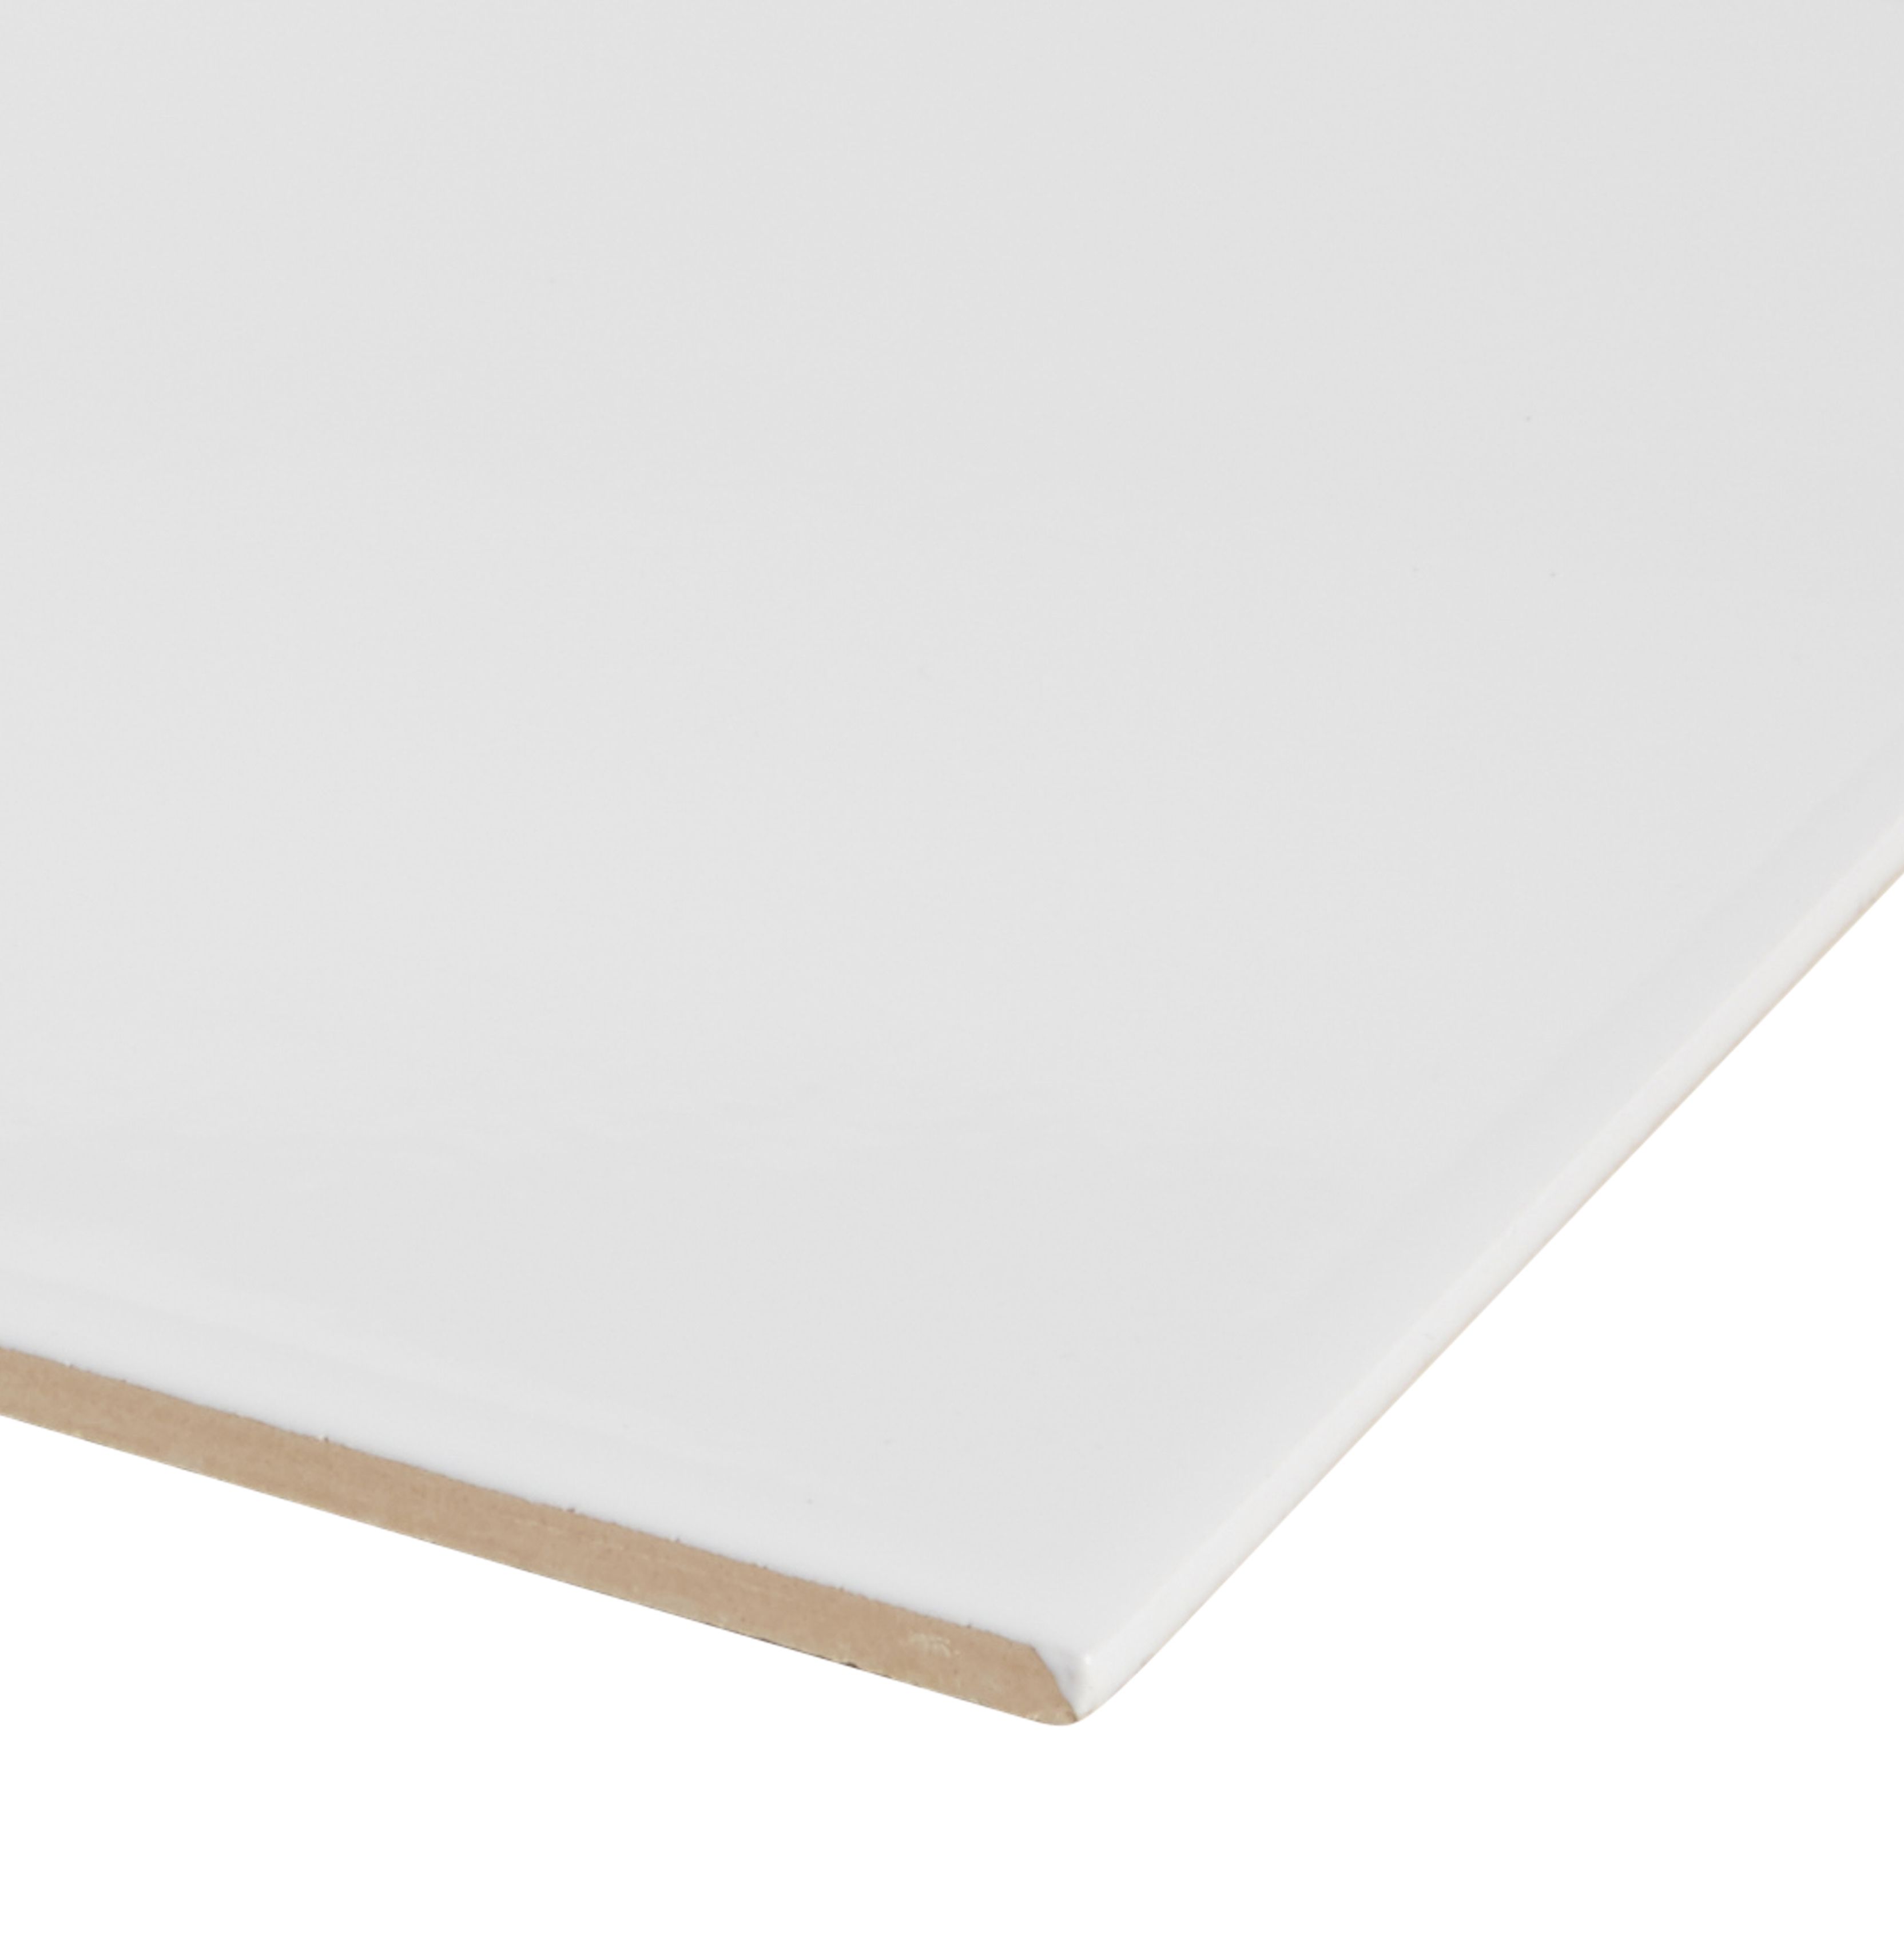 Spezzia White Gloss Flat Glossy Ceramic Indoor Wall Tile, Pack of 20, (L)250mm (W)200mm